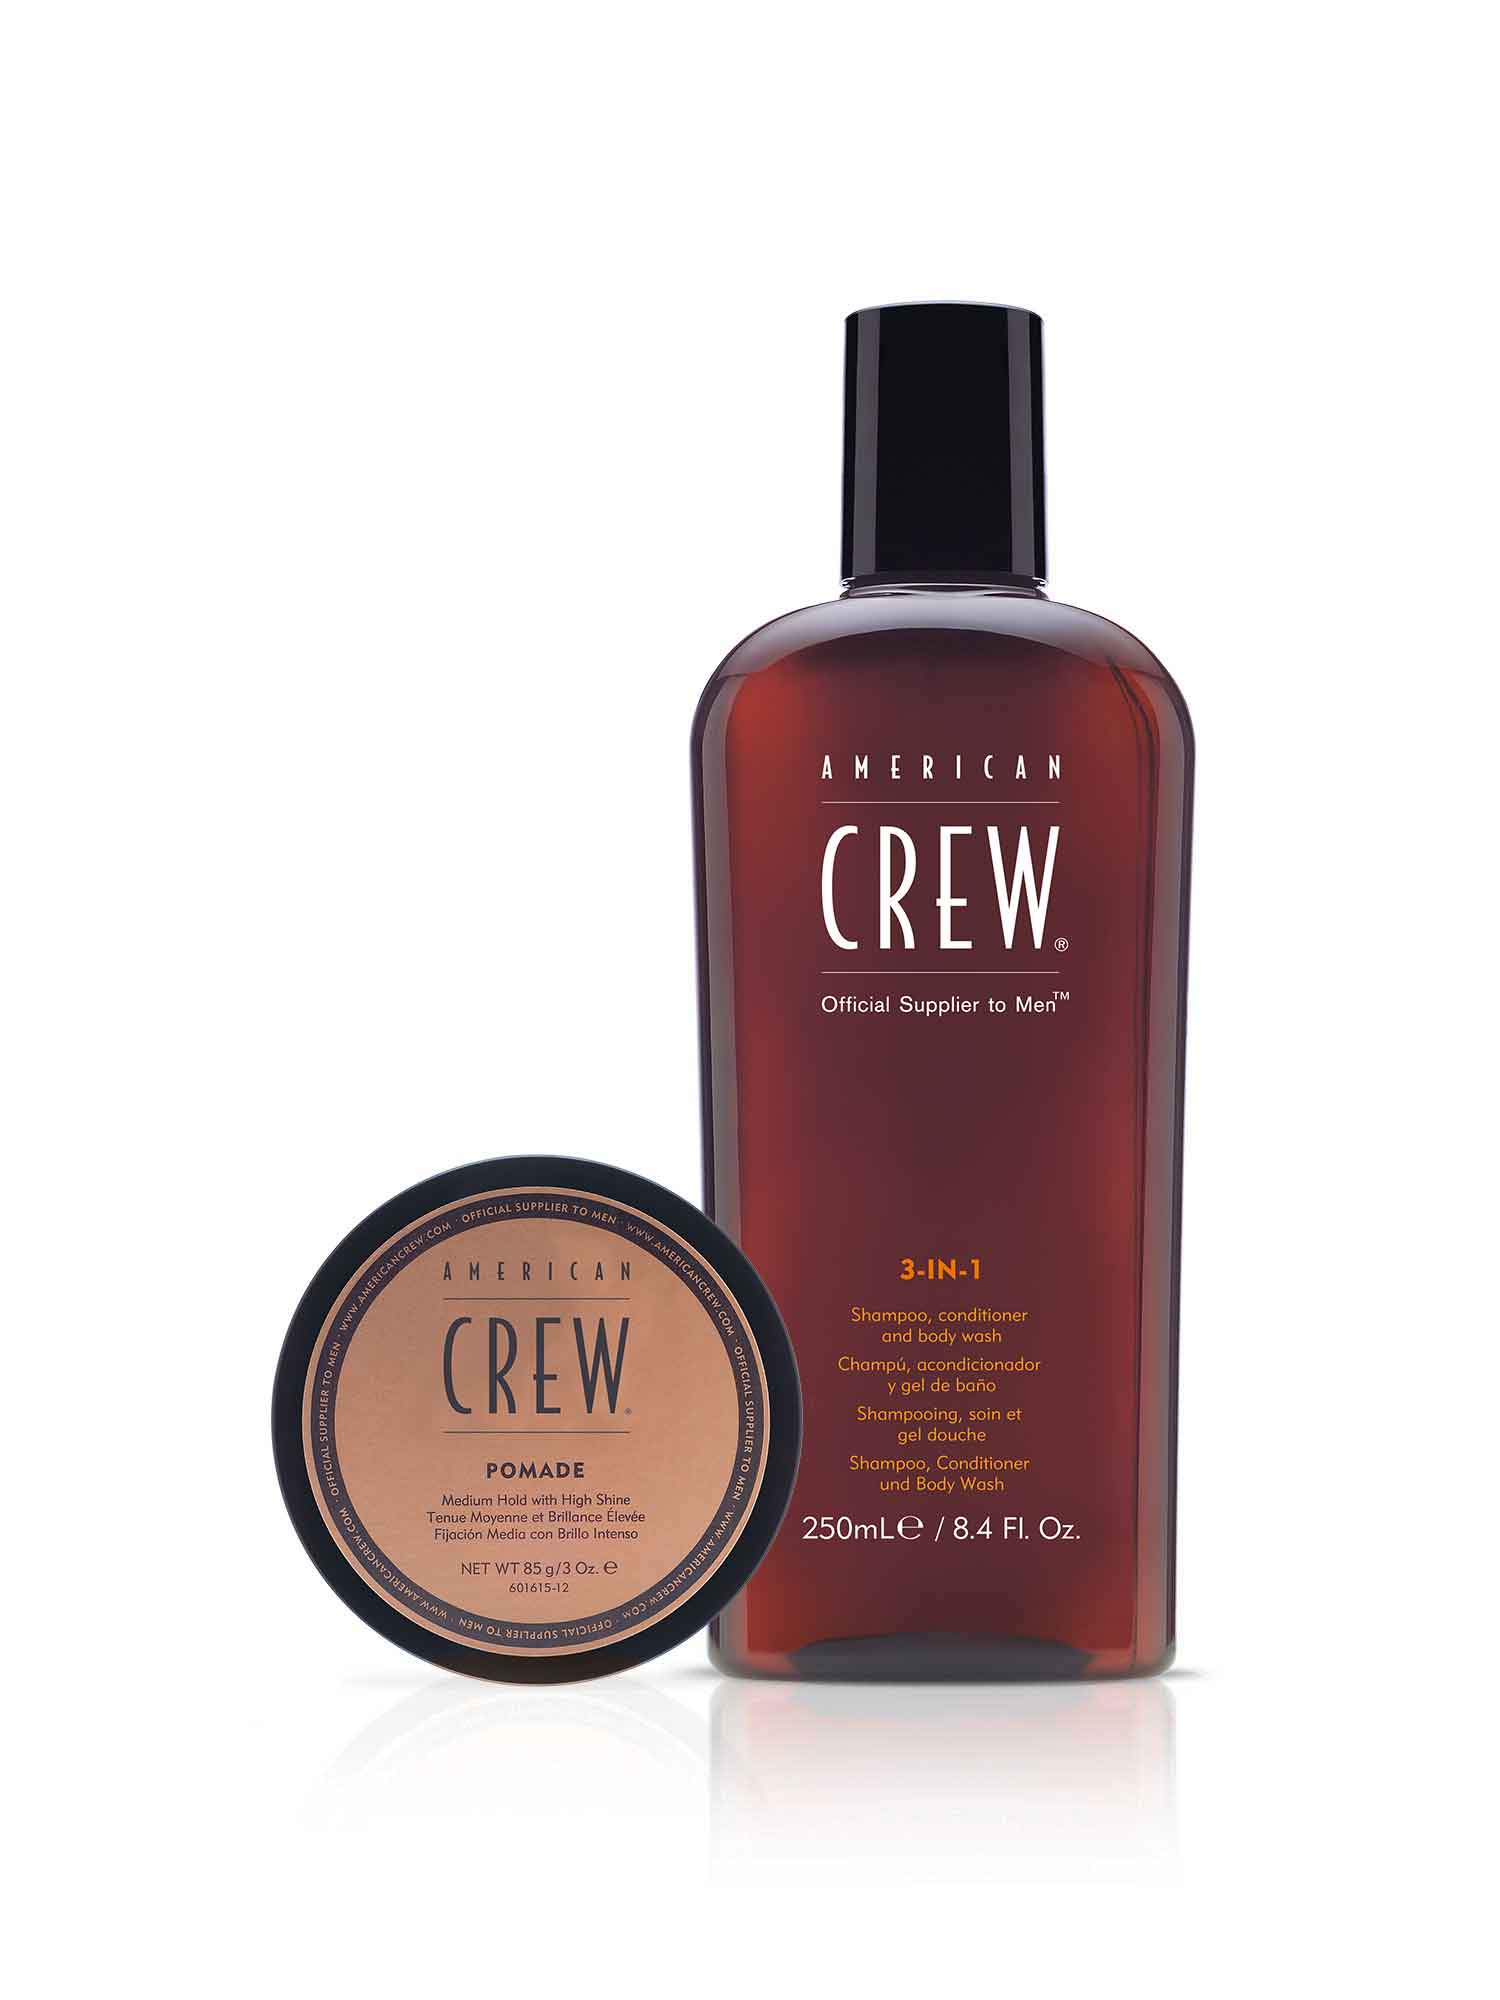 10 Hand-Picked Men's Gifts: Grooming Products With Meaning